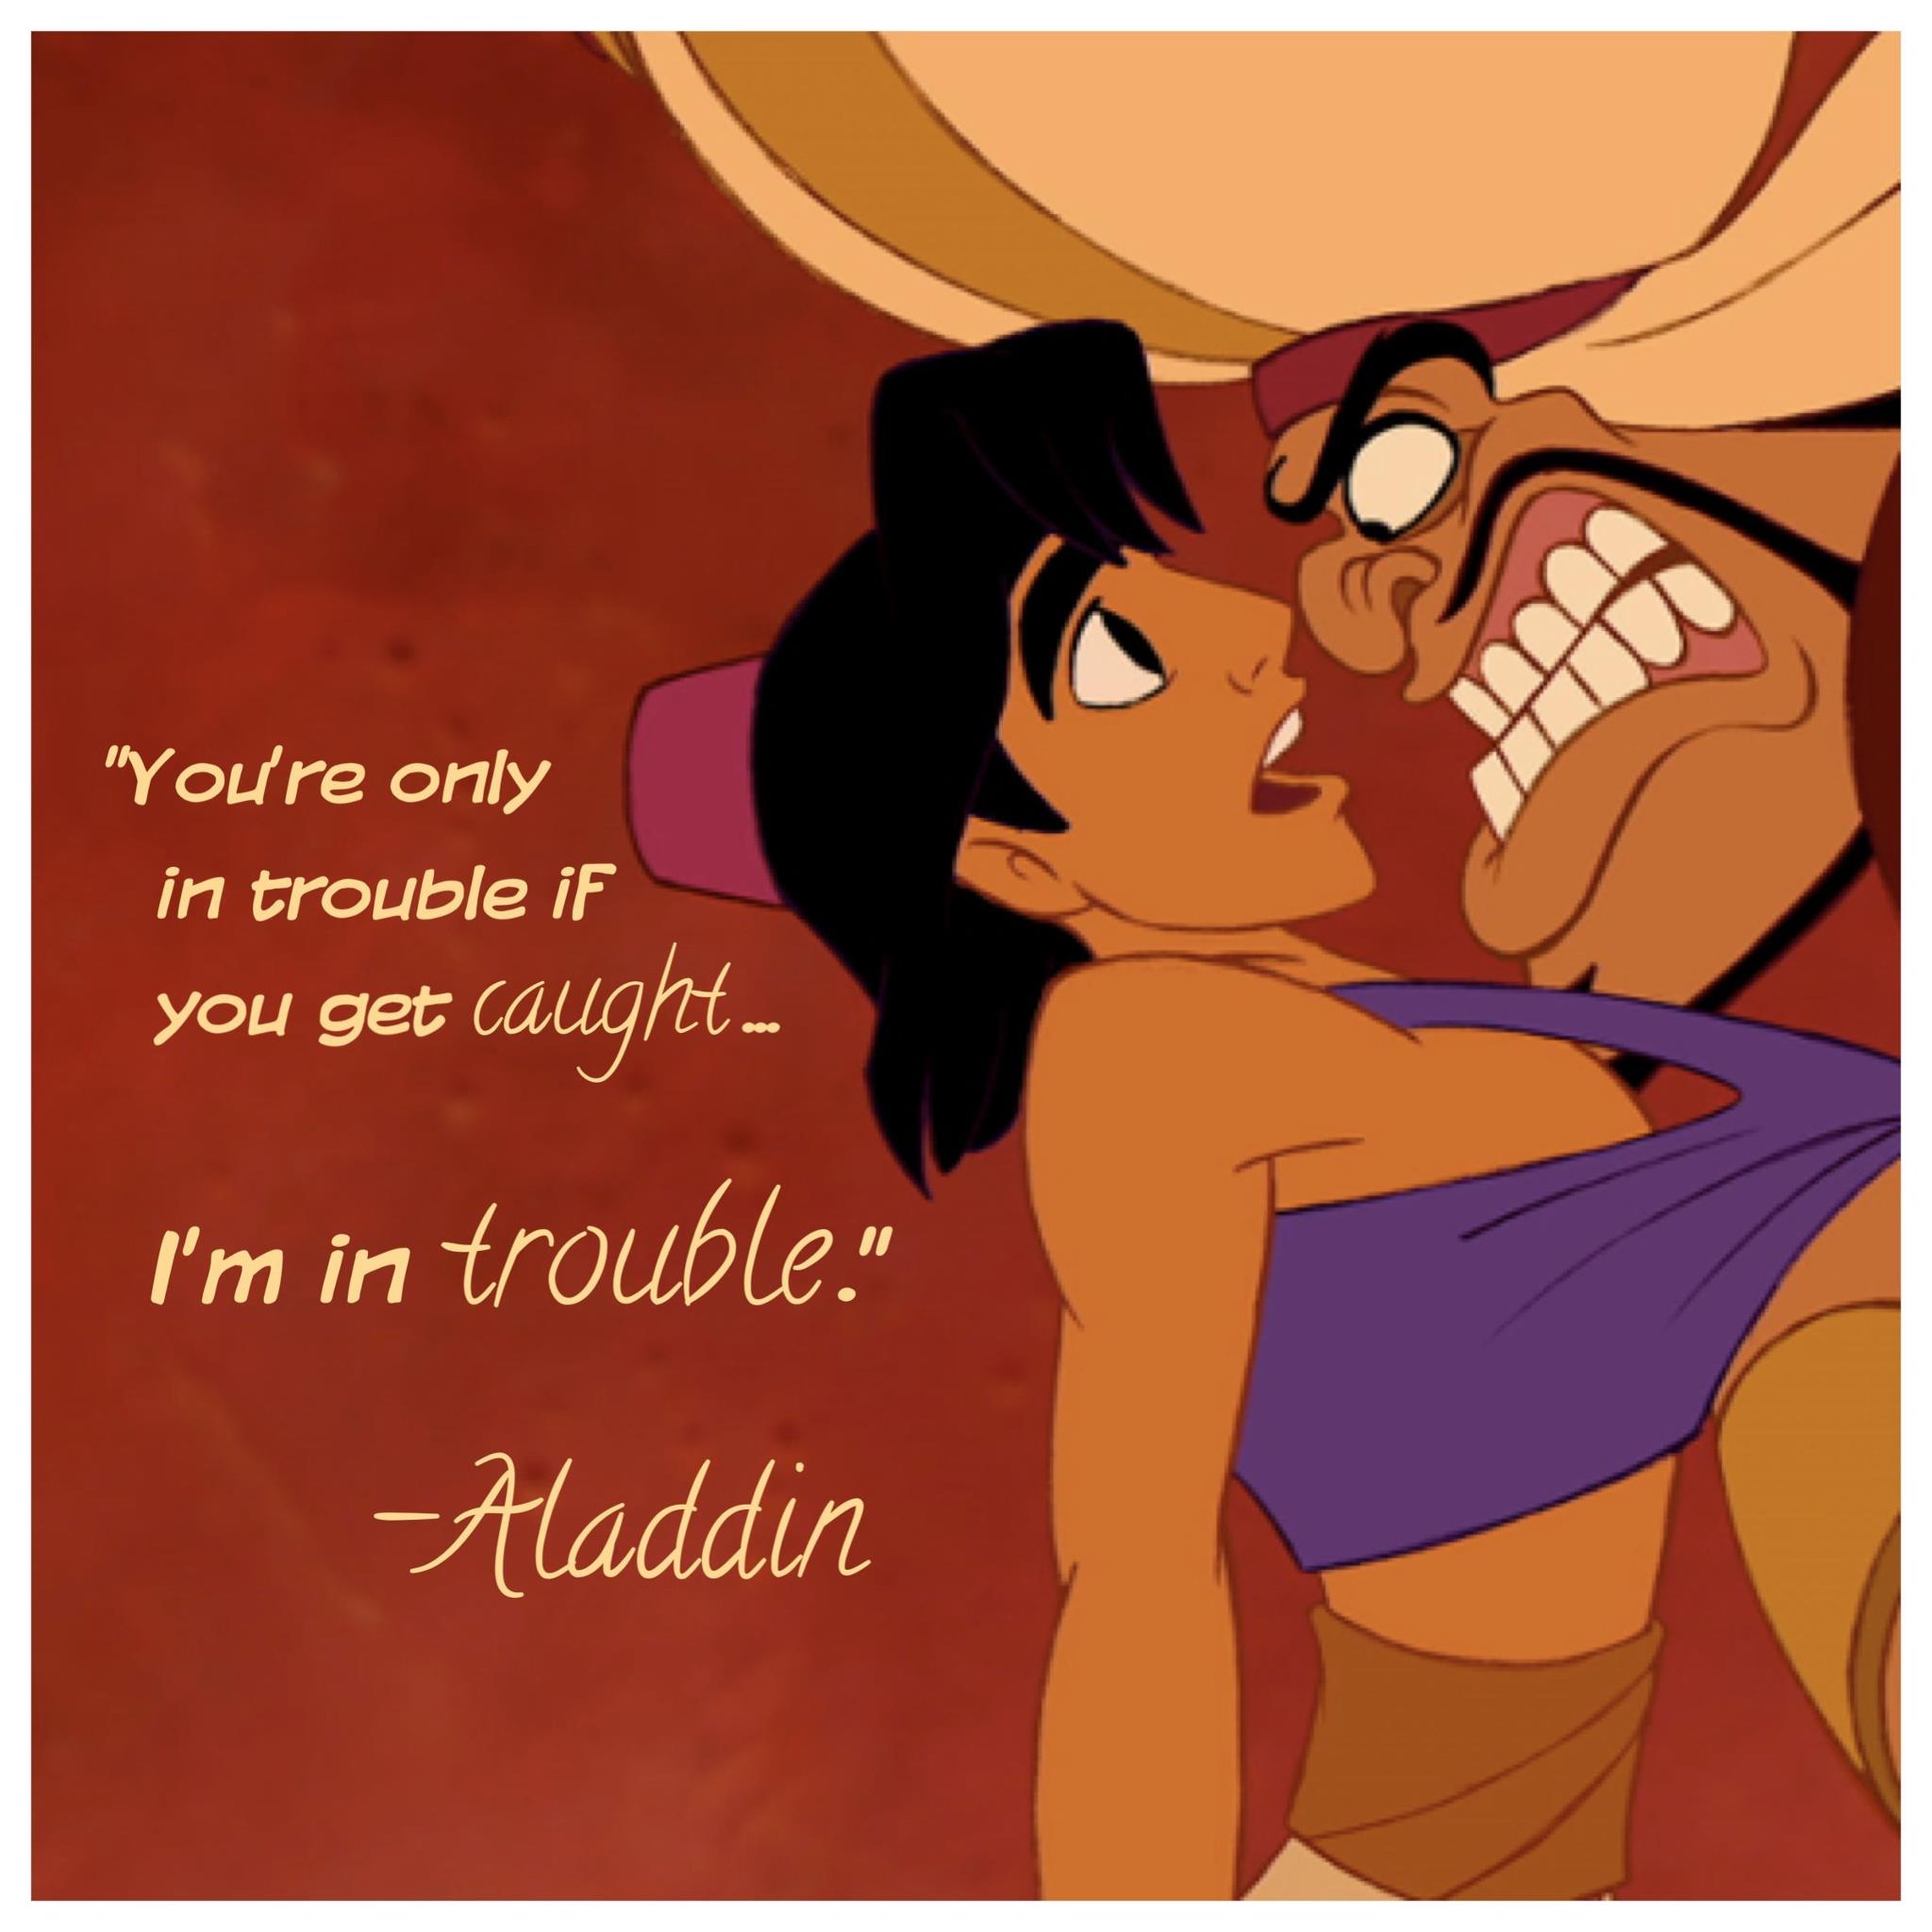 Iago From Aladdin Quotes.